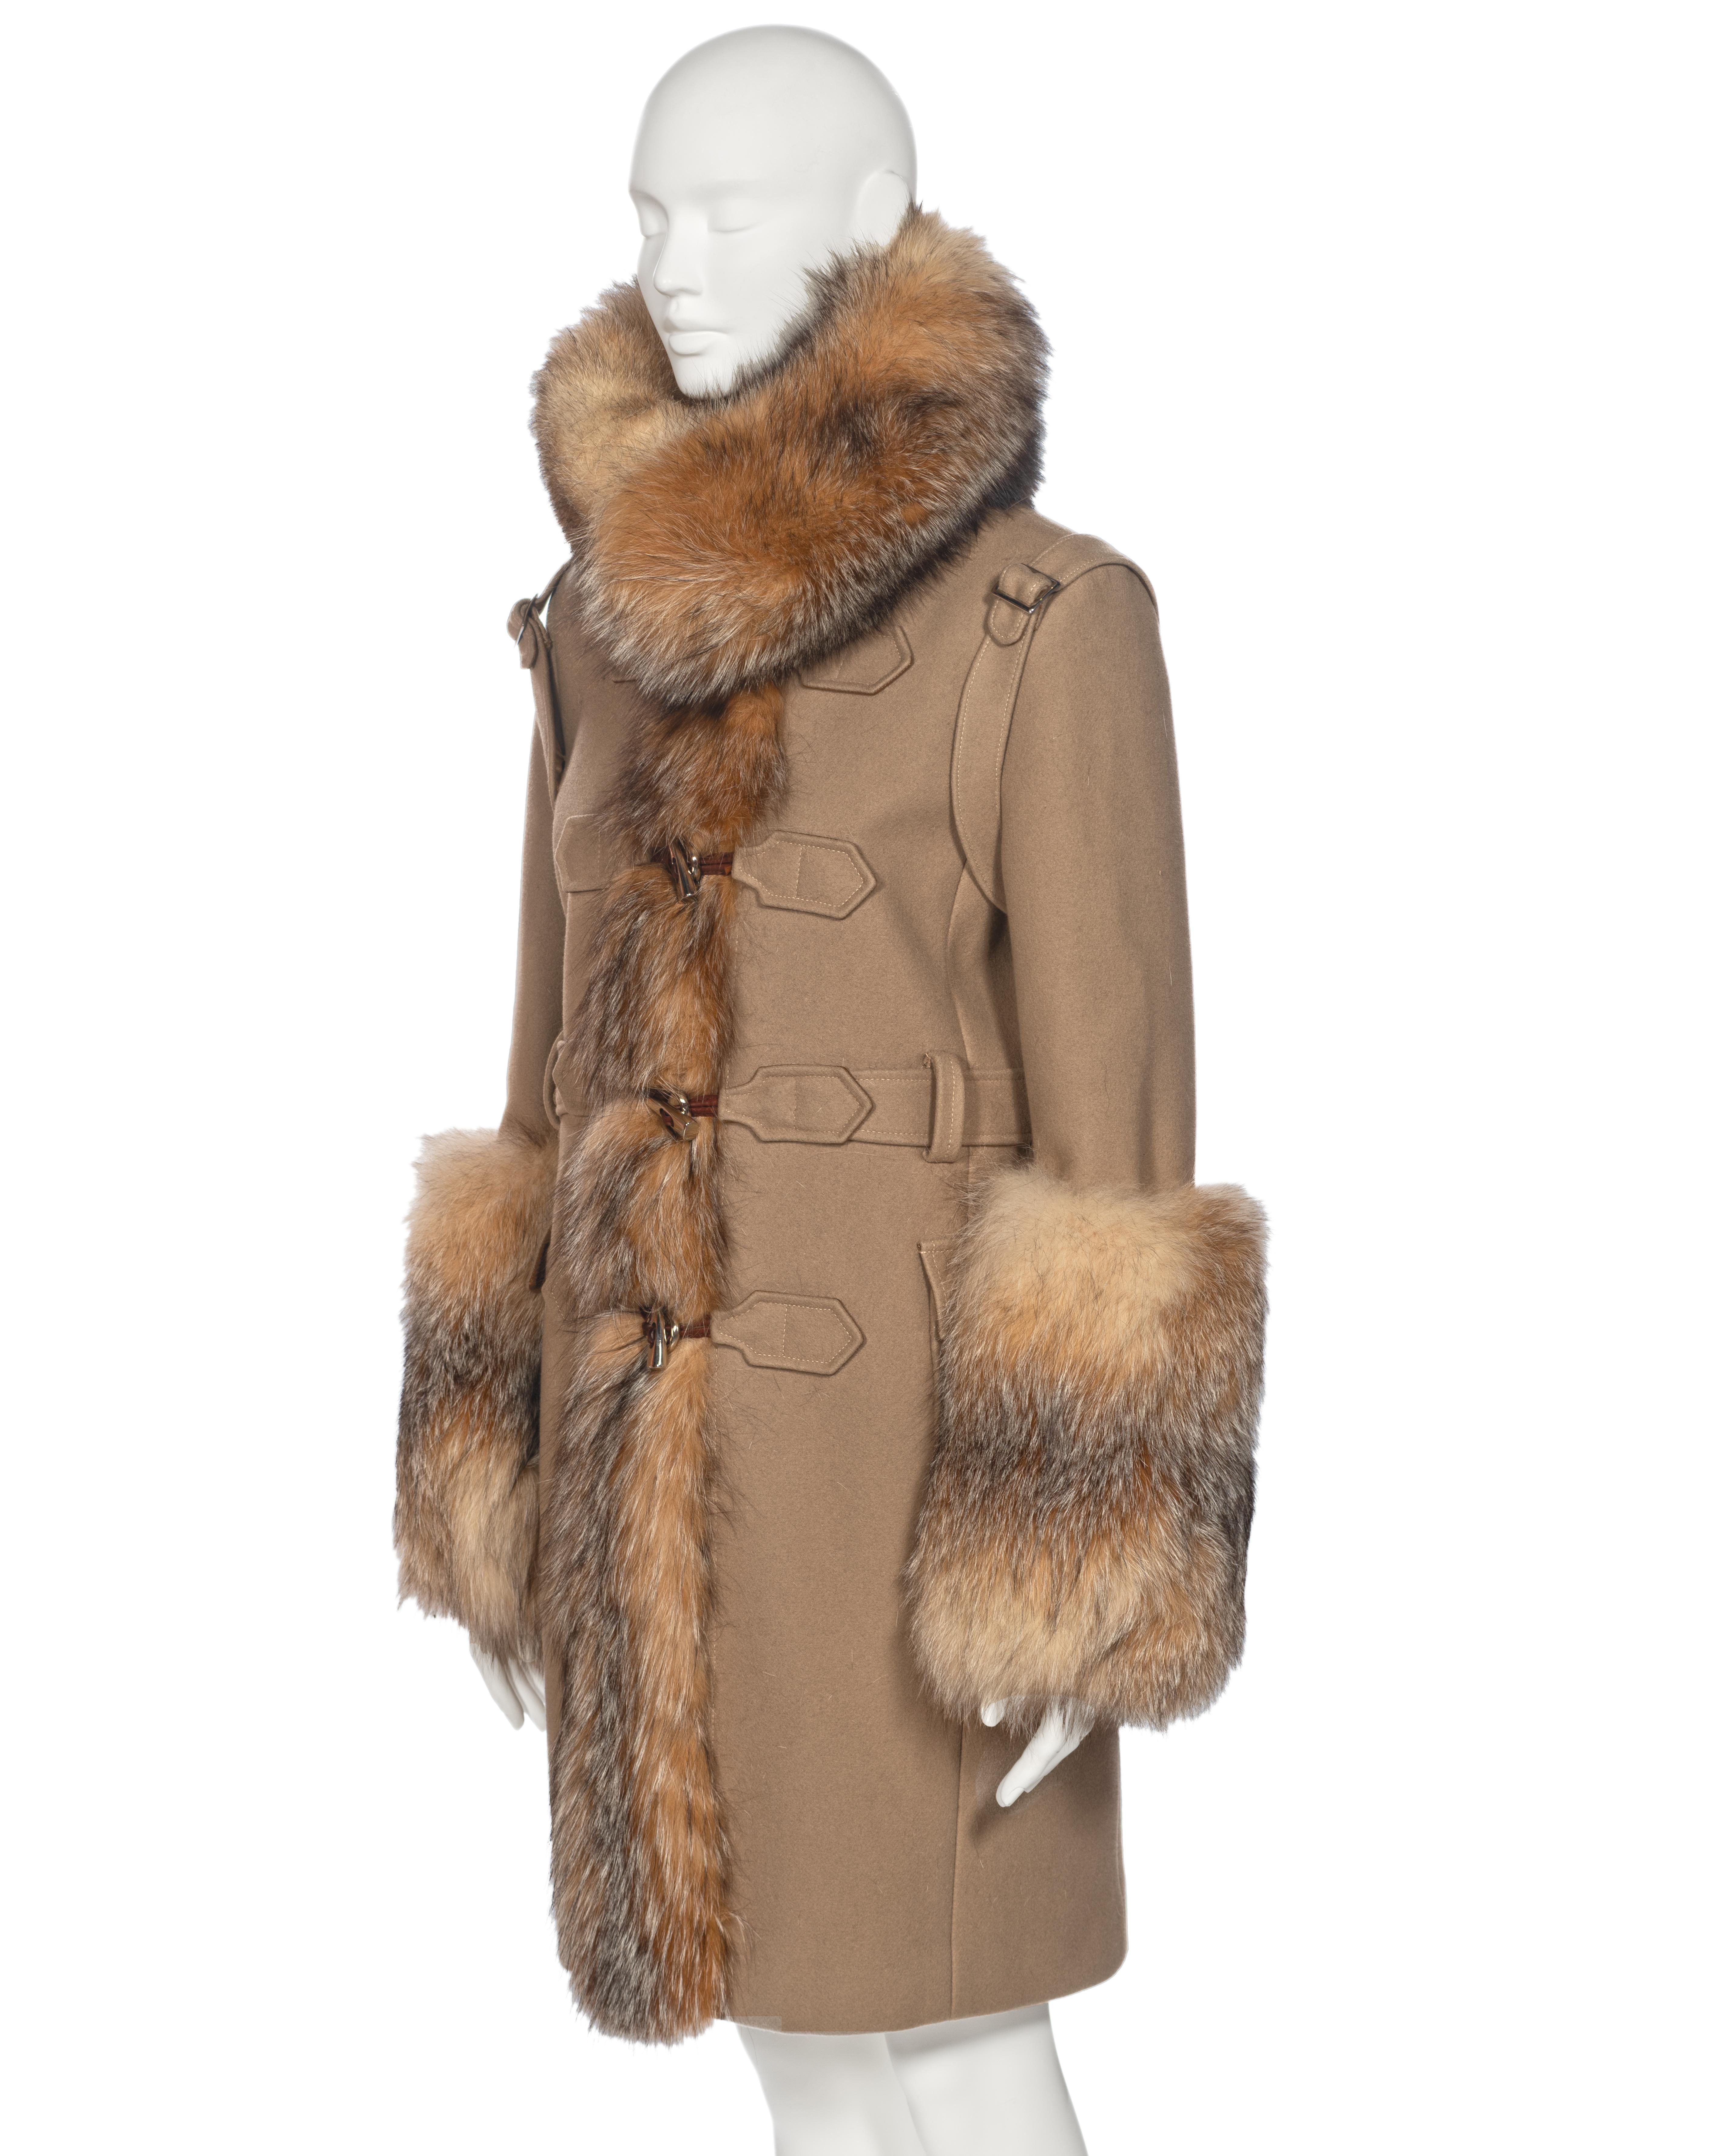 Balenciaga by Nicolas Ghesquière Fur-Trimmed Felted Wool Duffle Coat, fw 2005 For Sale 12